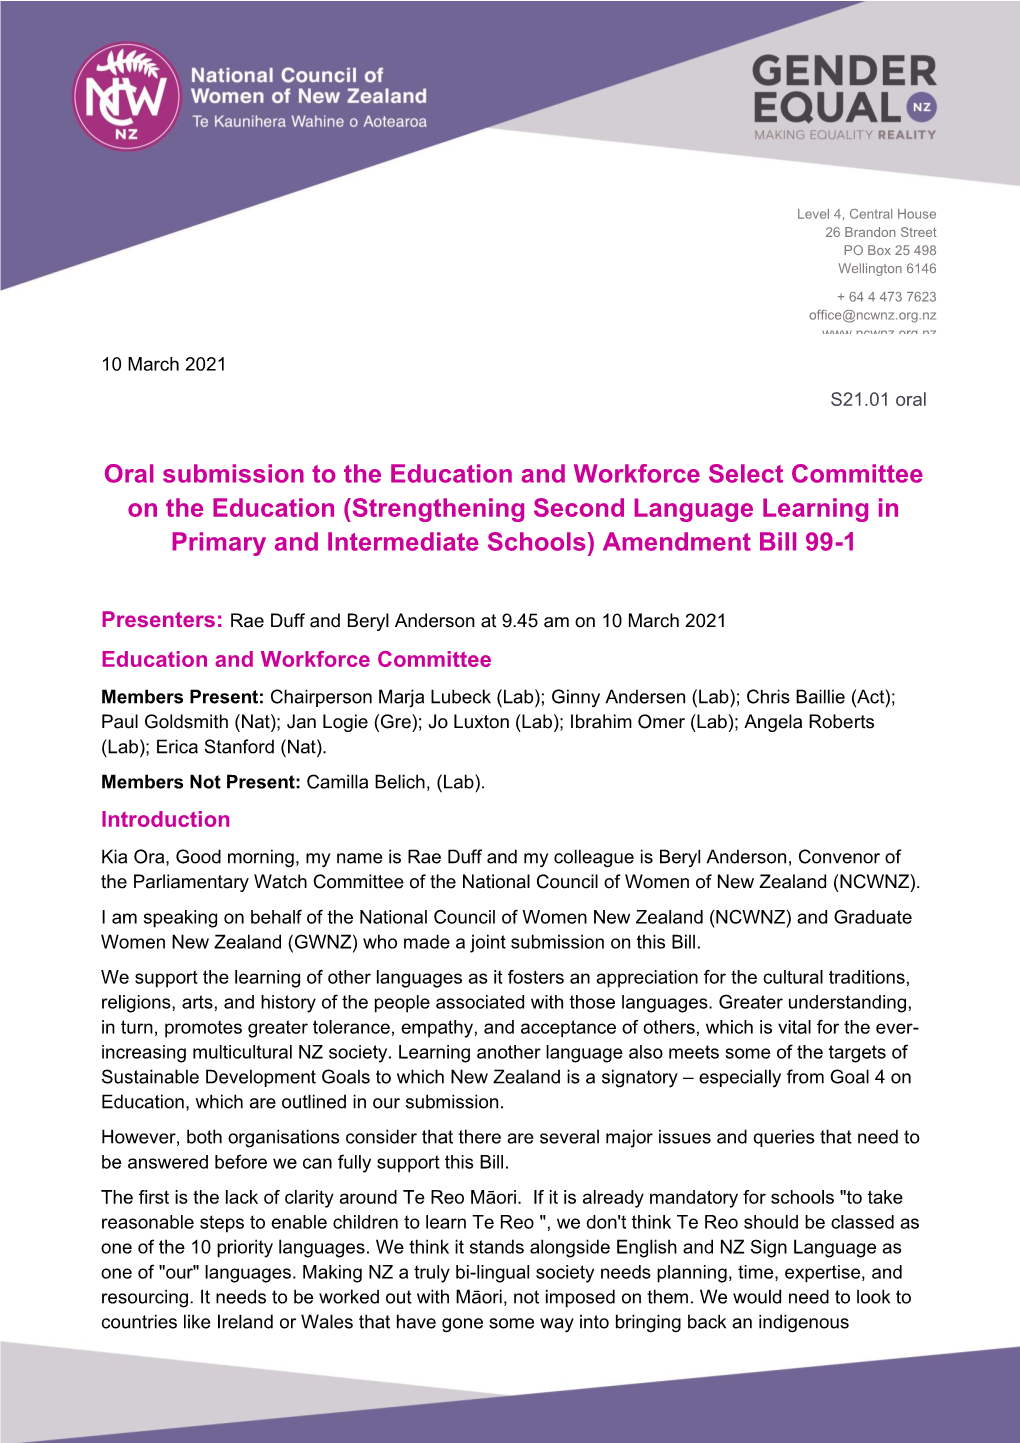 Strengthening Second Language Learning in Primary and Intermediate Schools) Amendment Bill 99-1